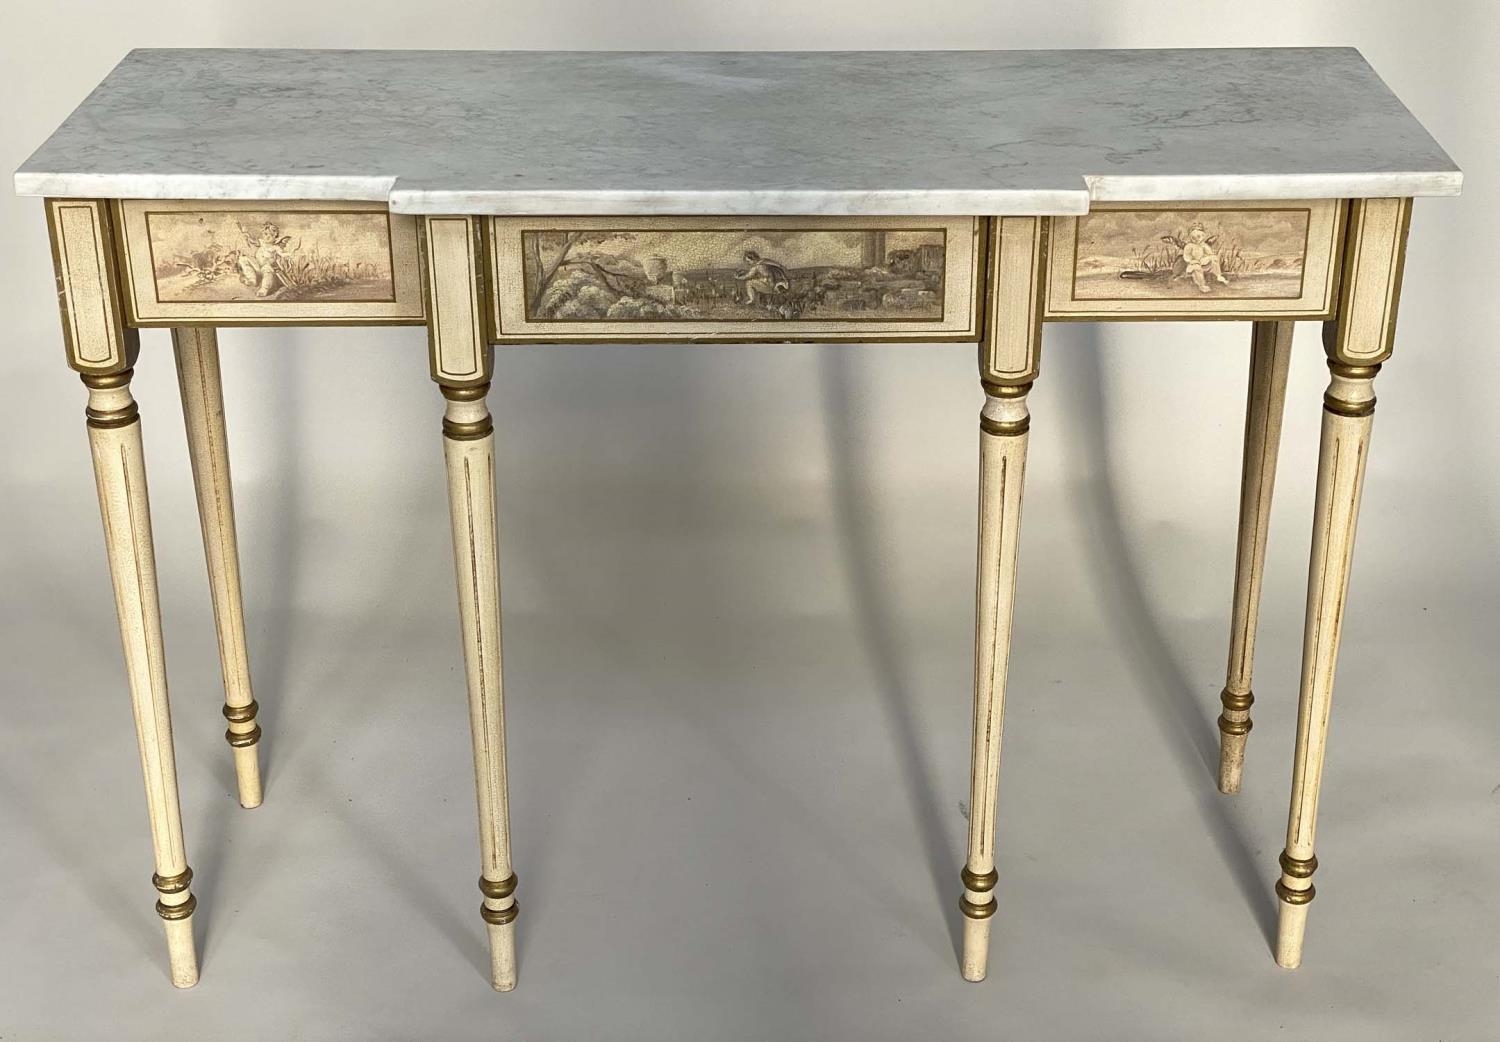 CONSOLE TABLE, Italian style breakfront form with Carrara marble top, cherub painted frieze and